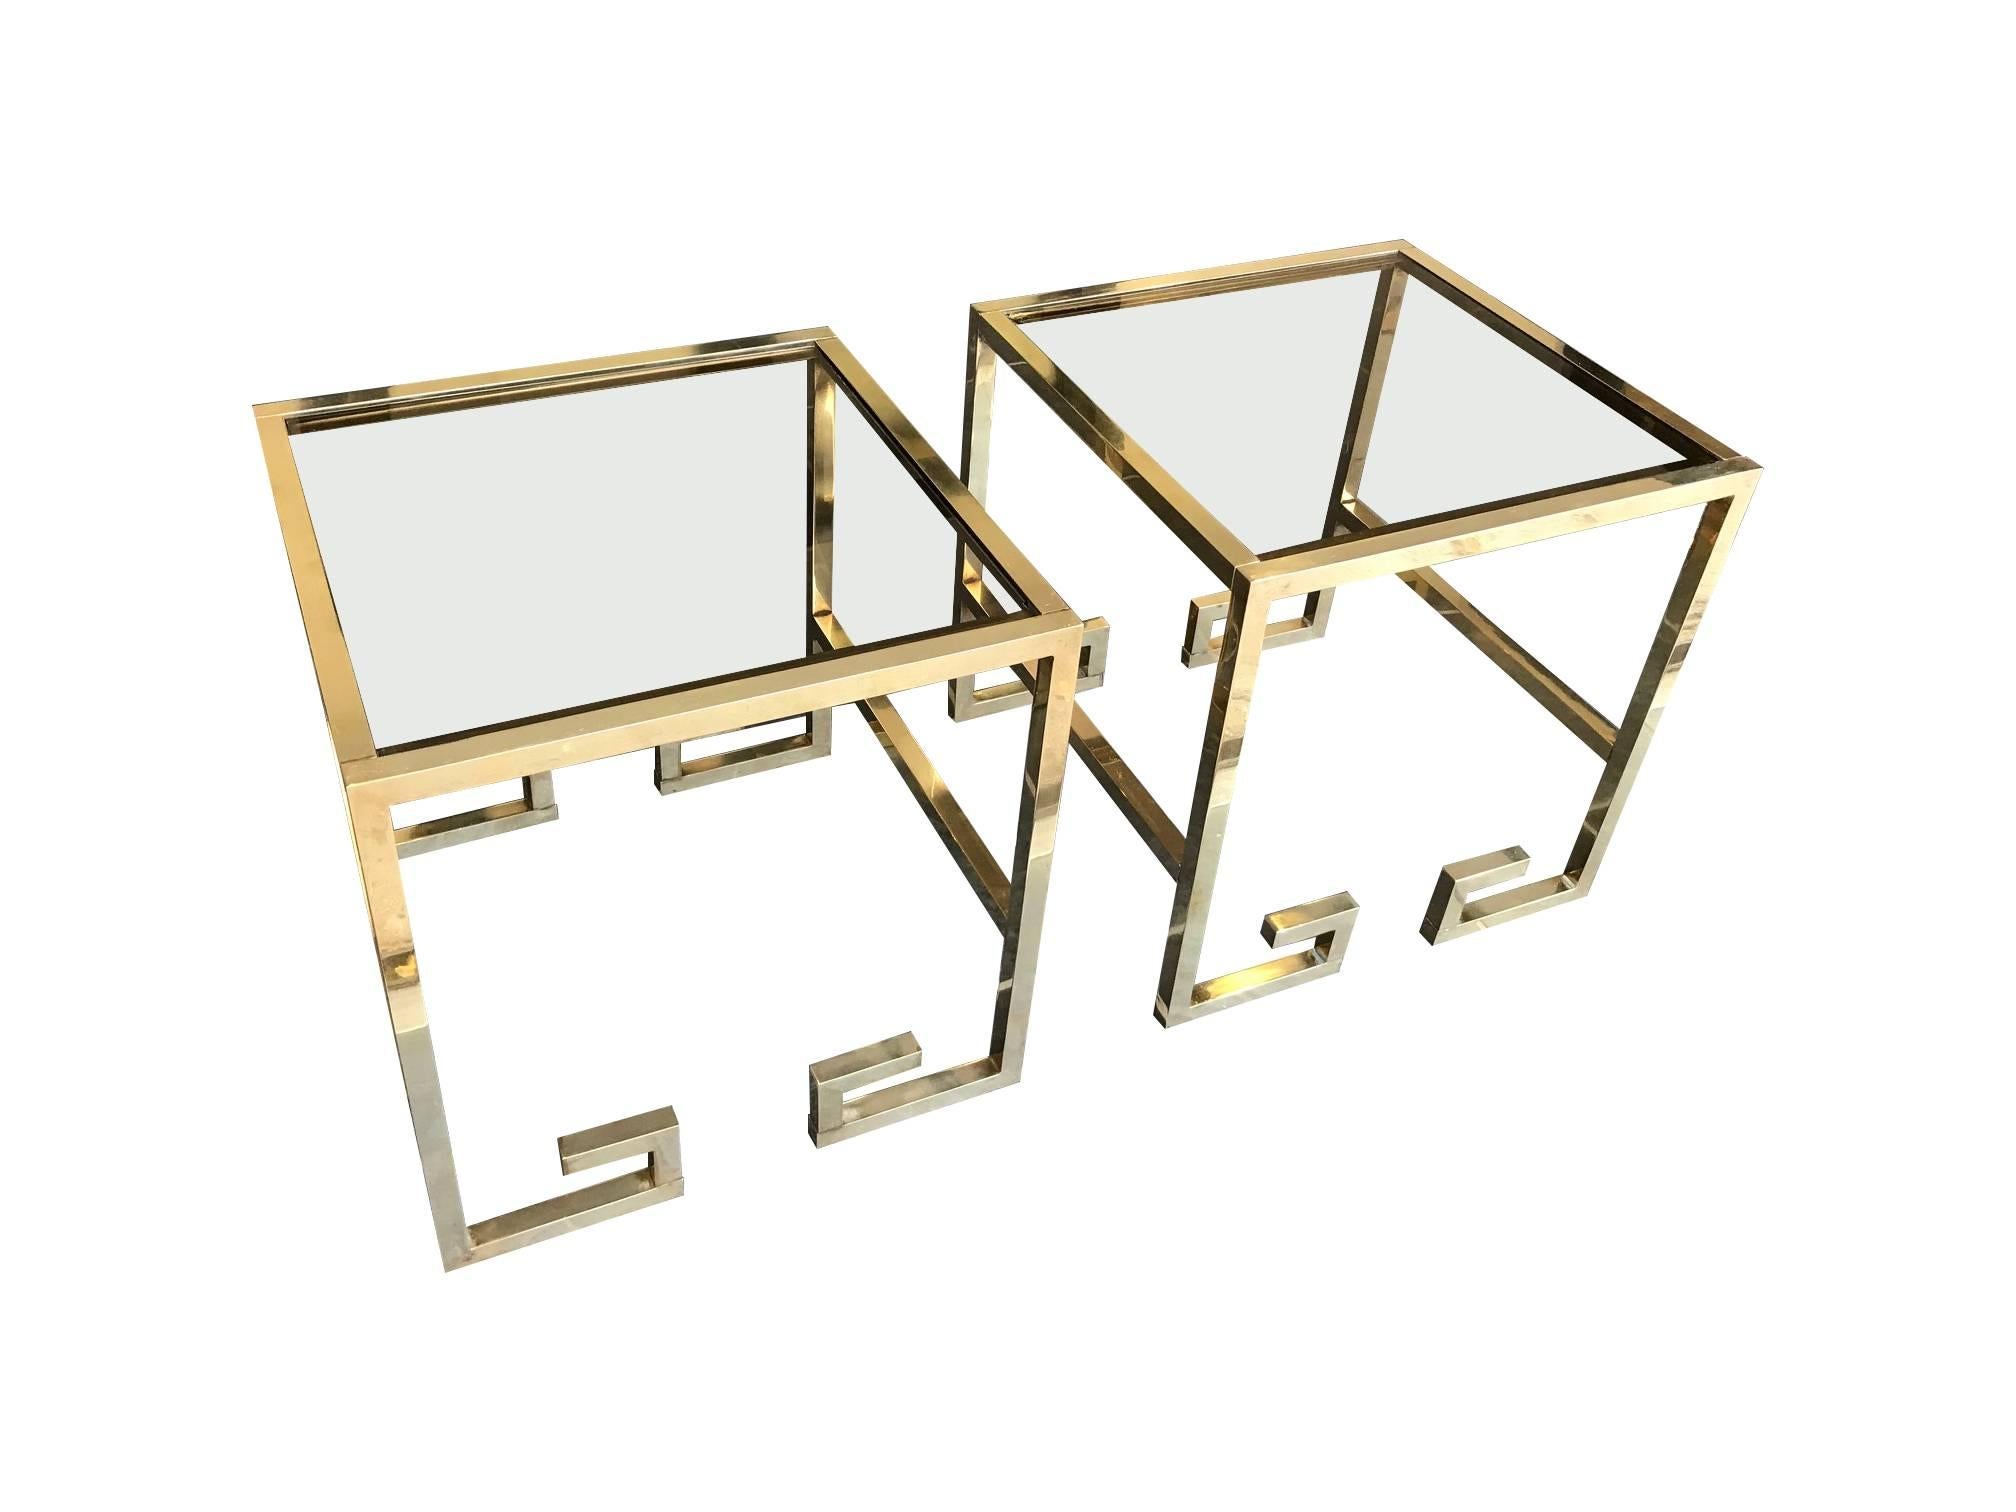 A pair of Italian Greek key design side tables, in brass with smoked glass tops.